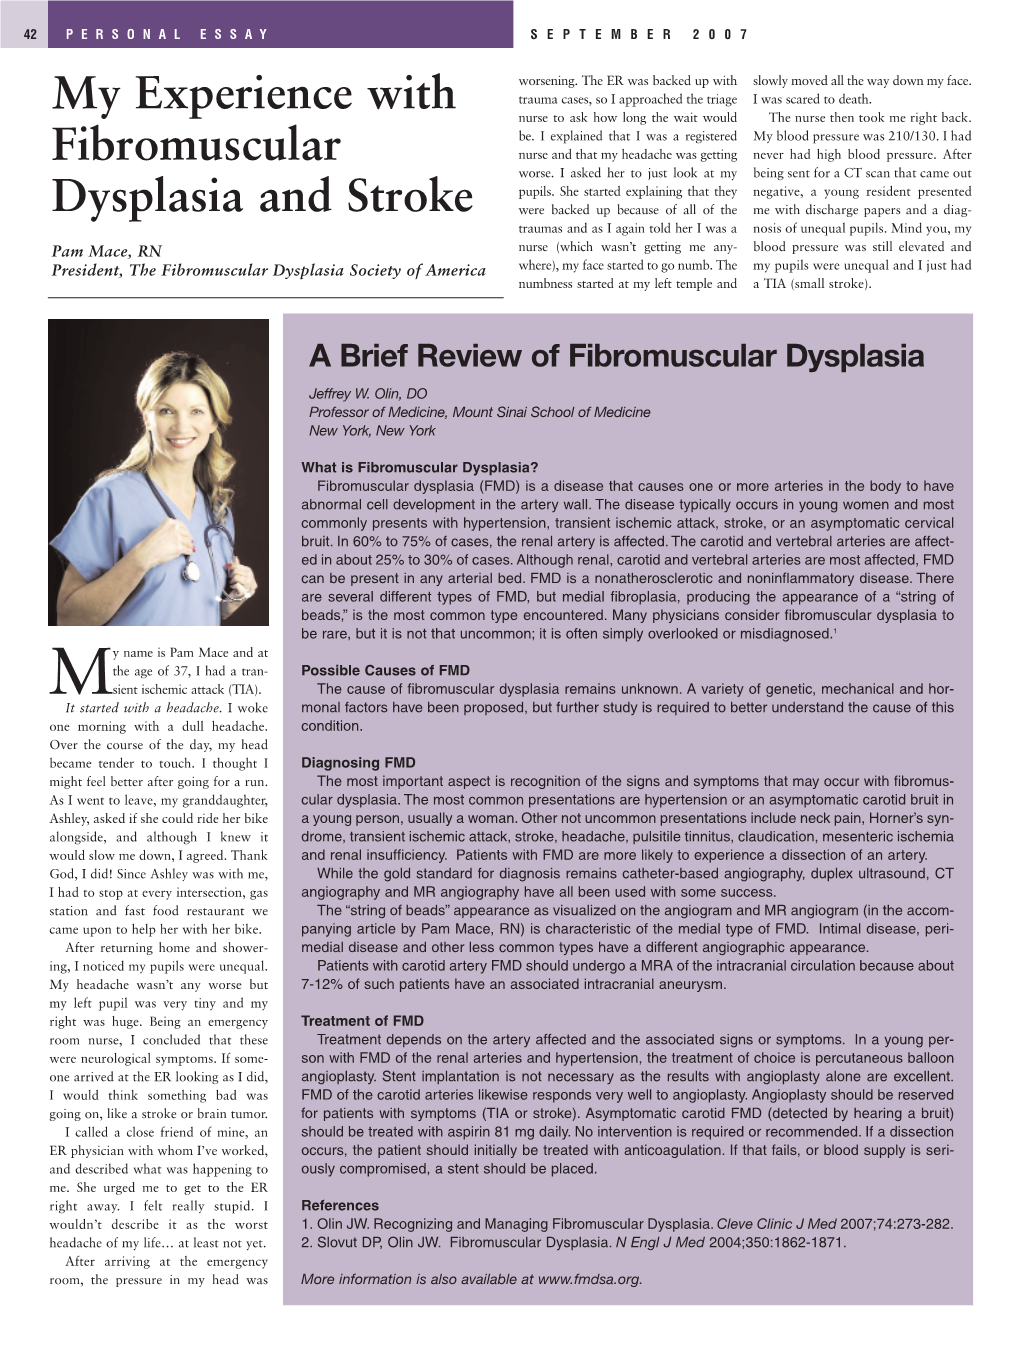 My Experience with Fibromuscular Dysplasia and Stroke